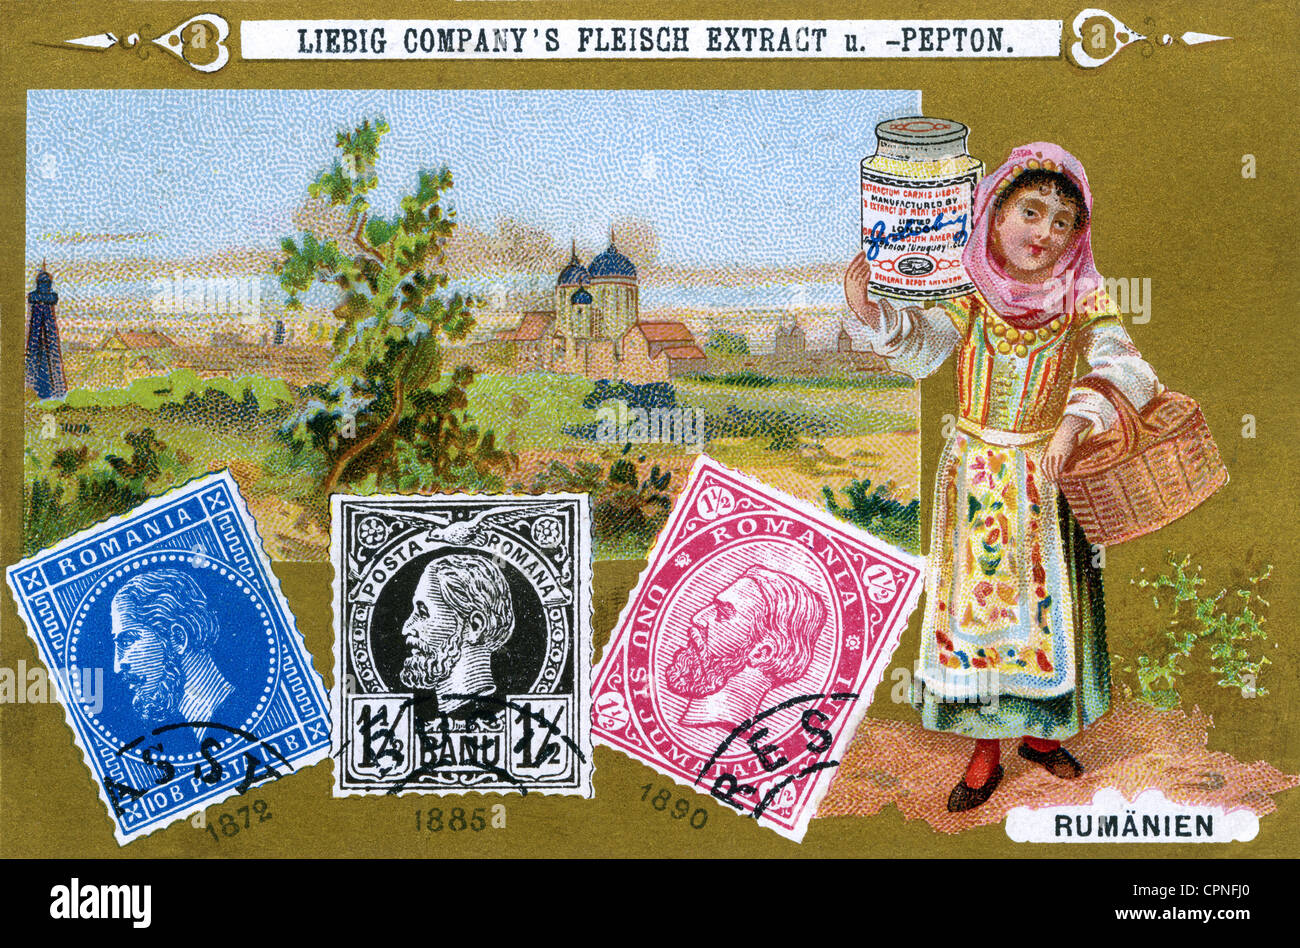 mail, postage stamp, Romanian postage stamp, 1872, 1885, Liebig collecting picture, lithograph, Germany, circa 1898, Romania, Rumania, postage stamp, postage stamps, philately, stamps collecting, decorative, woman, women, Romanian, traditional costume, national costume, dress, traditional costumes, national costumes, dresses, collecting picture, collecting pictures, collector cards, trading card, collectible card, 19th century, mark, postal stamp, postal stamps, mail, post, postal system, historic, historical, people, female, Additional-Rights-Clearences-Not Available Stock Photo